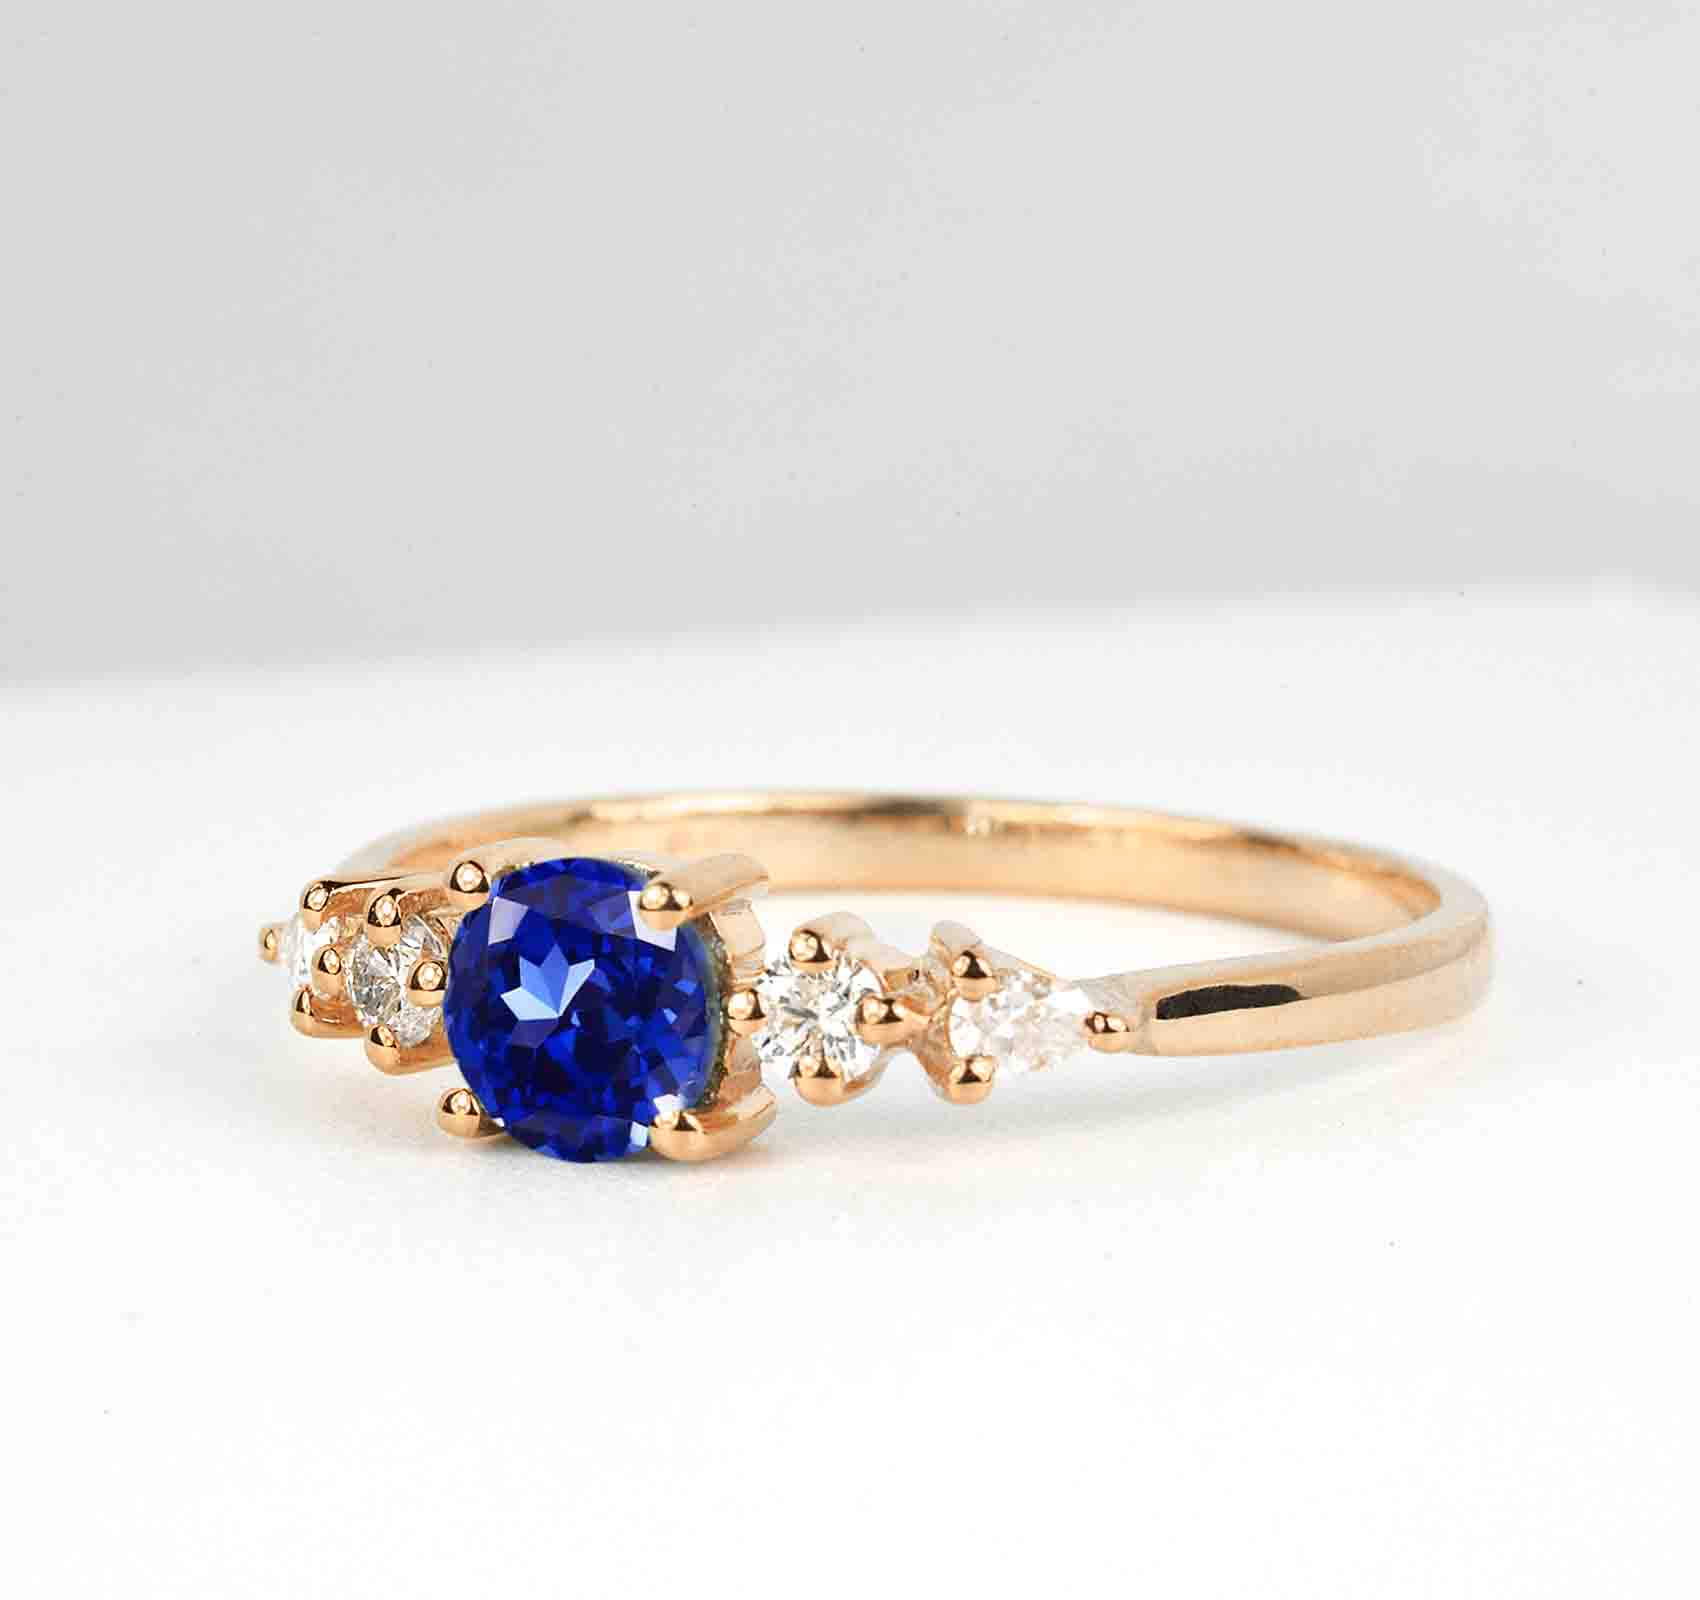 Vintage blue sapphire ring in rose gold - DIORAH JEWELLERS